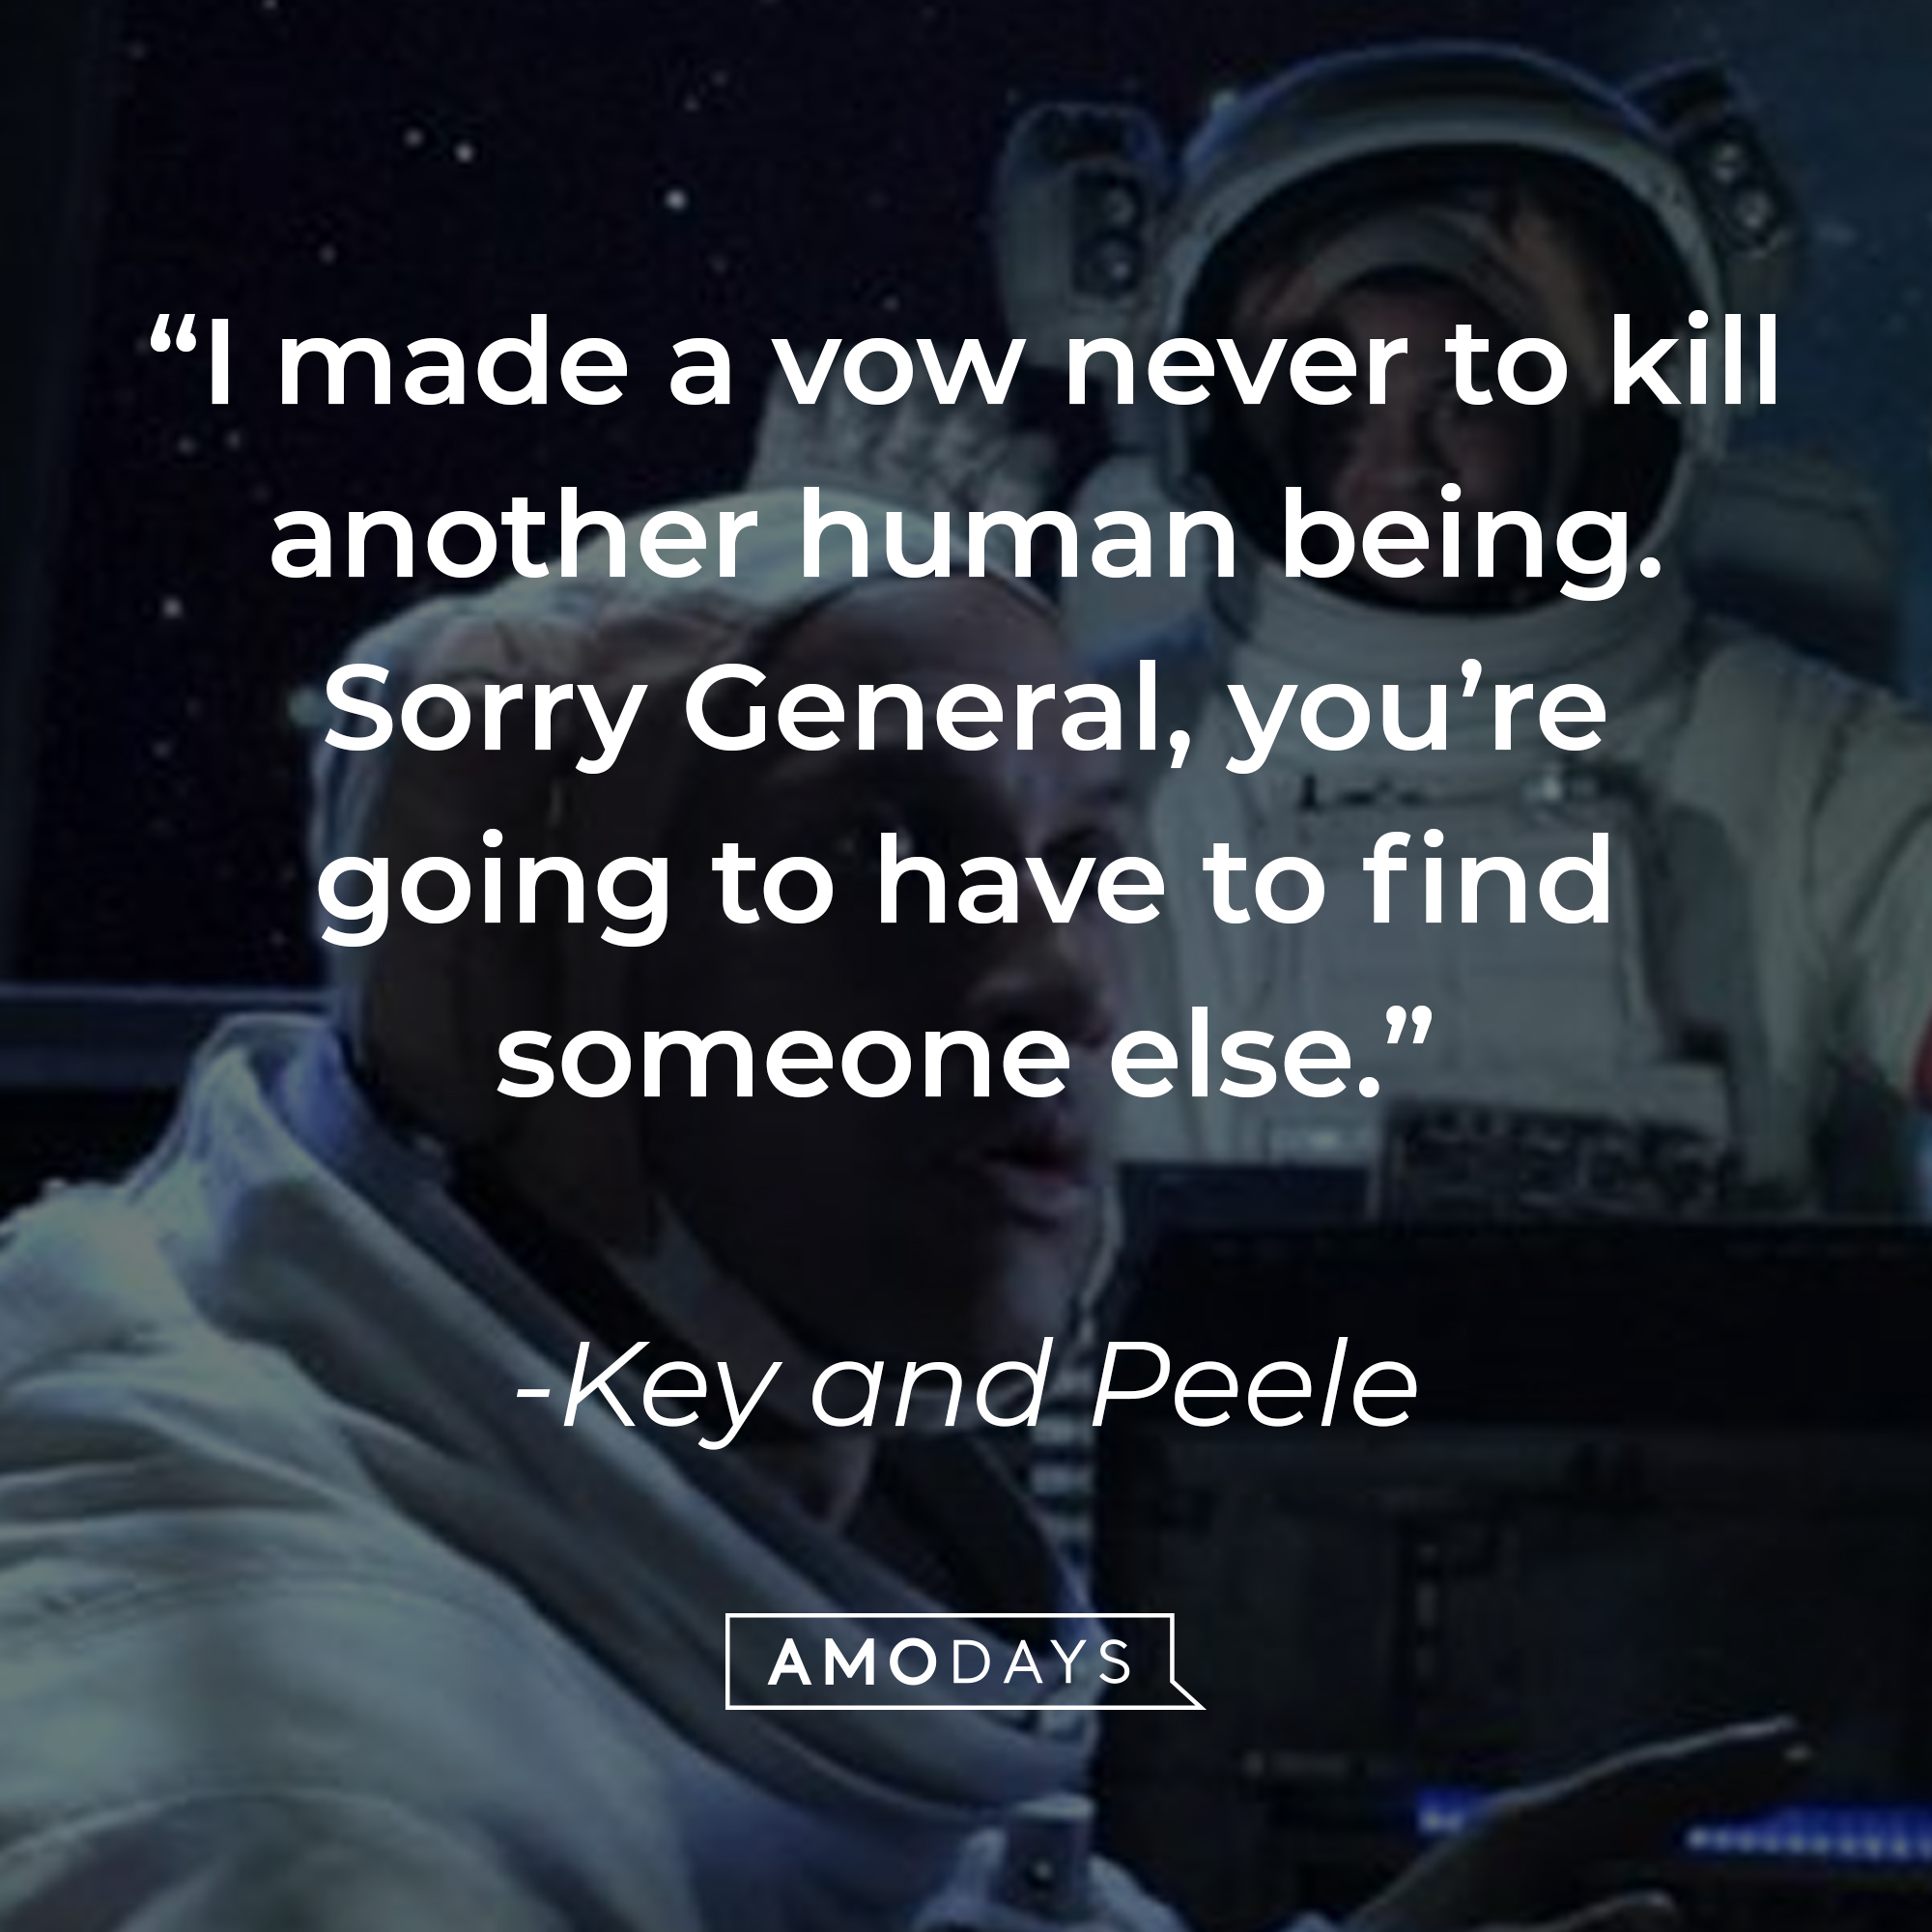 "Key and Peele's" quote: “I made a vow never to kill another human being. Sorry General, you’re going to have to find someone else." | Source: facebook.com/KeyAndPeele